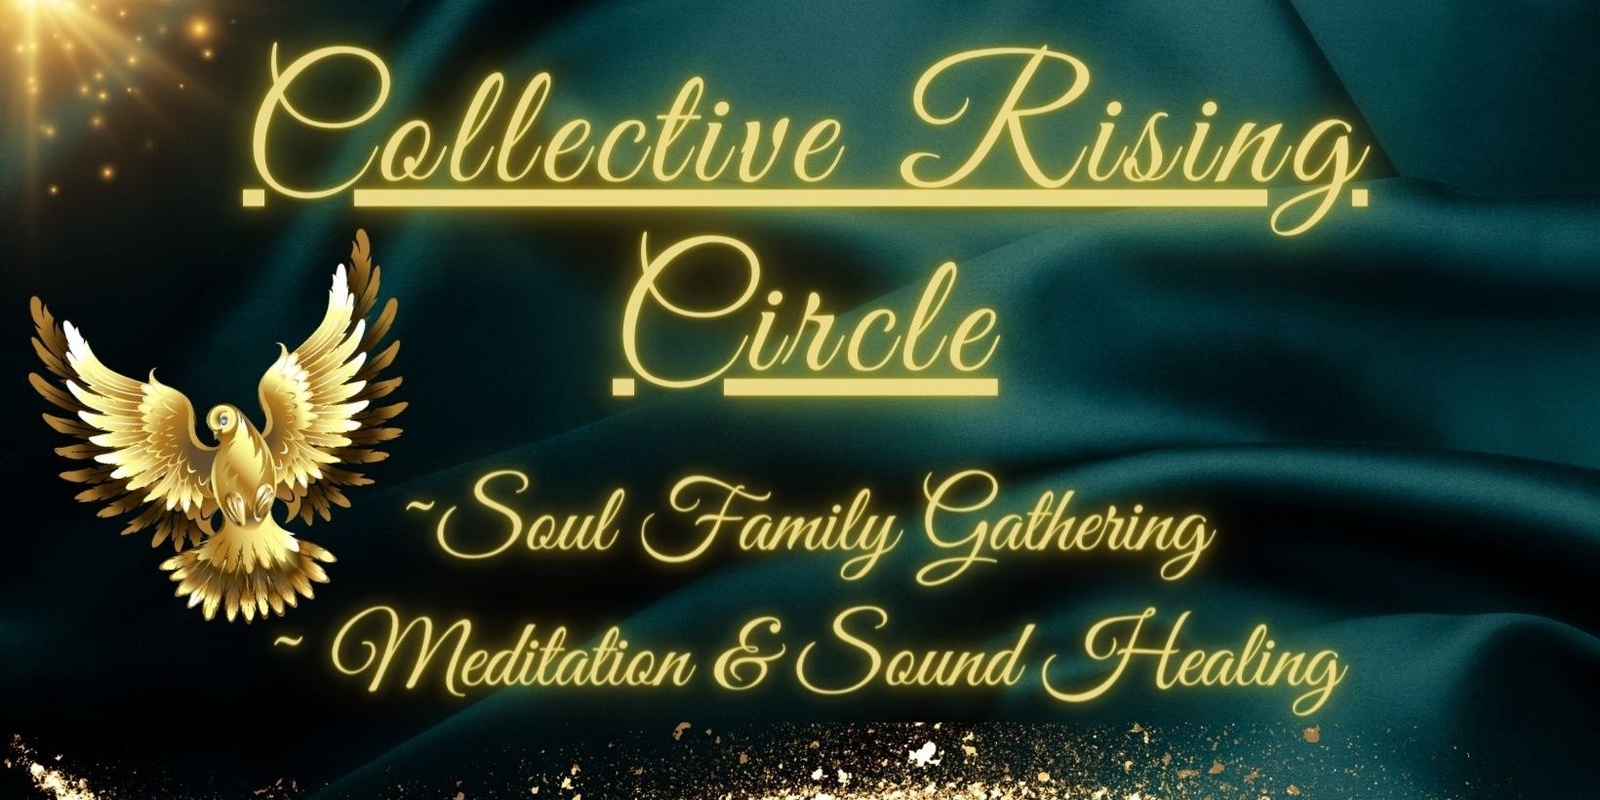 Banner image for Collective Rising Circle